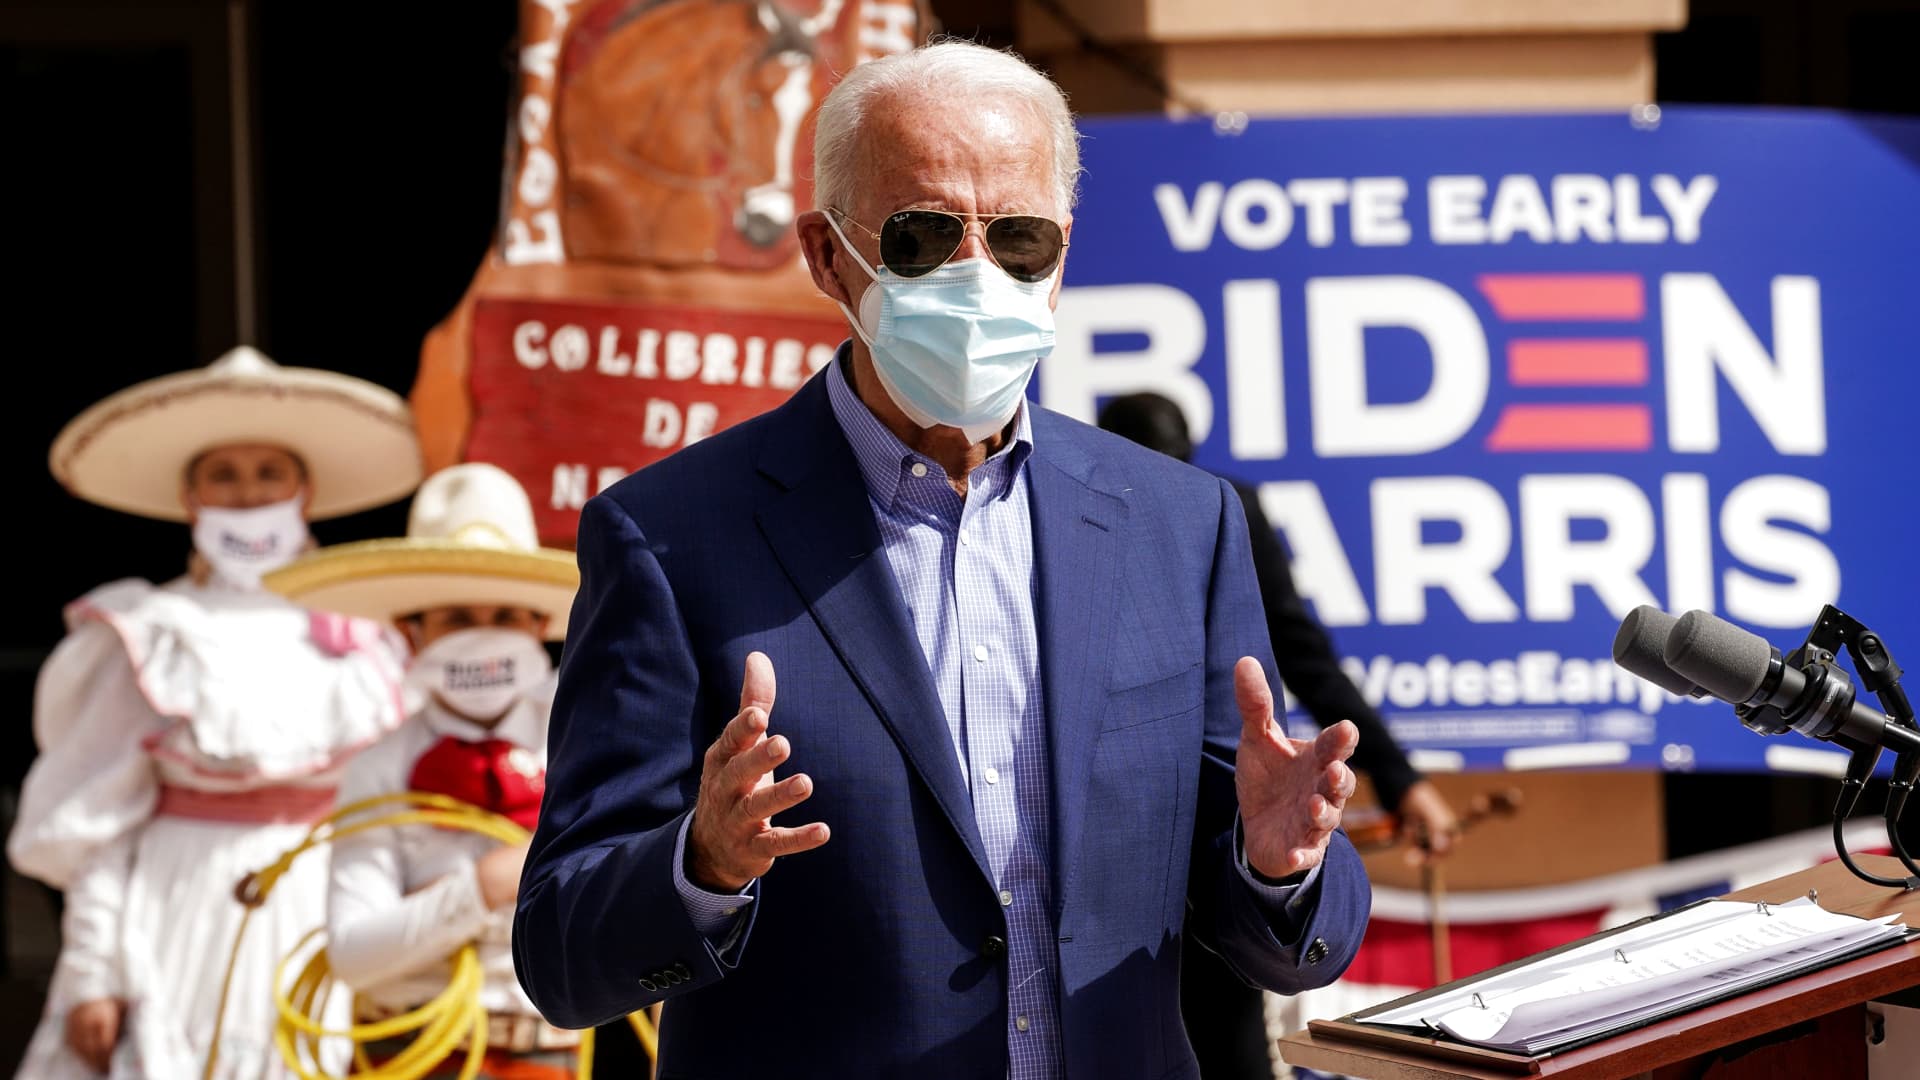 Members of a mariachi band look on as Democratic U.S. presidential nominee Joe Biden discusses the disproportionate ways coronavirus disease (COVID-19) has impacted Latinos in Nevada during a campaign stop at the East Las Vegas Community Center in Las Vegas, Nevada, October 9, 2020.